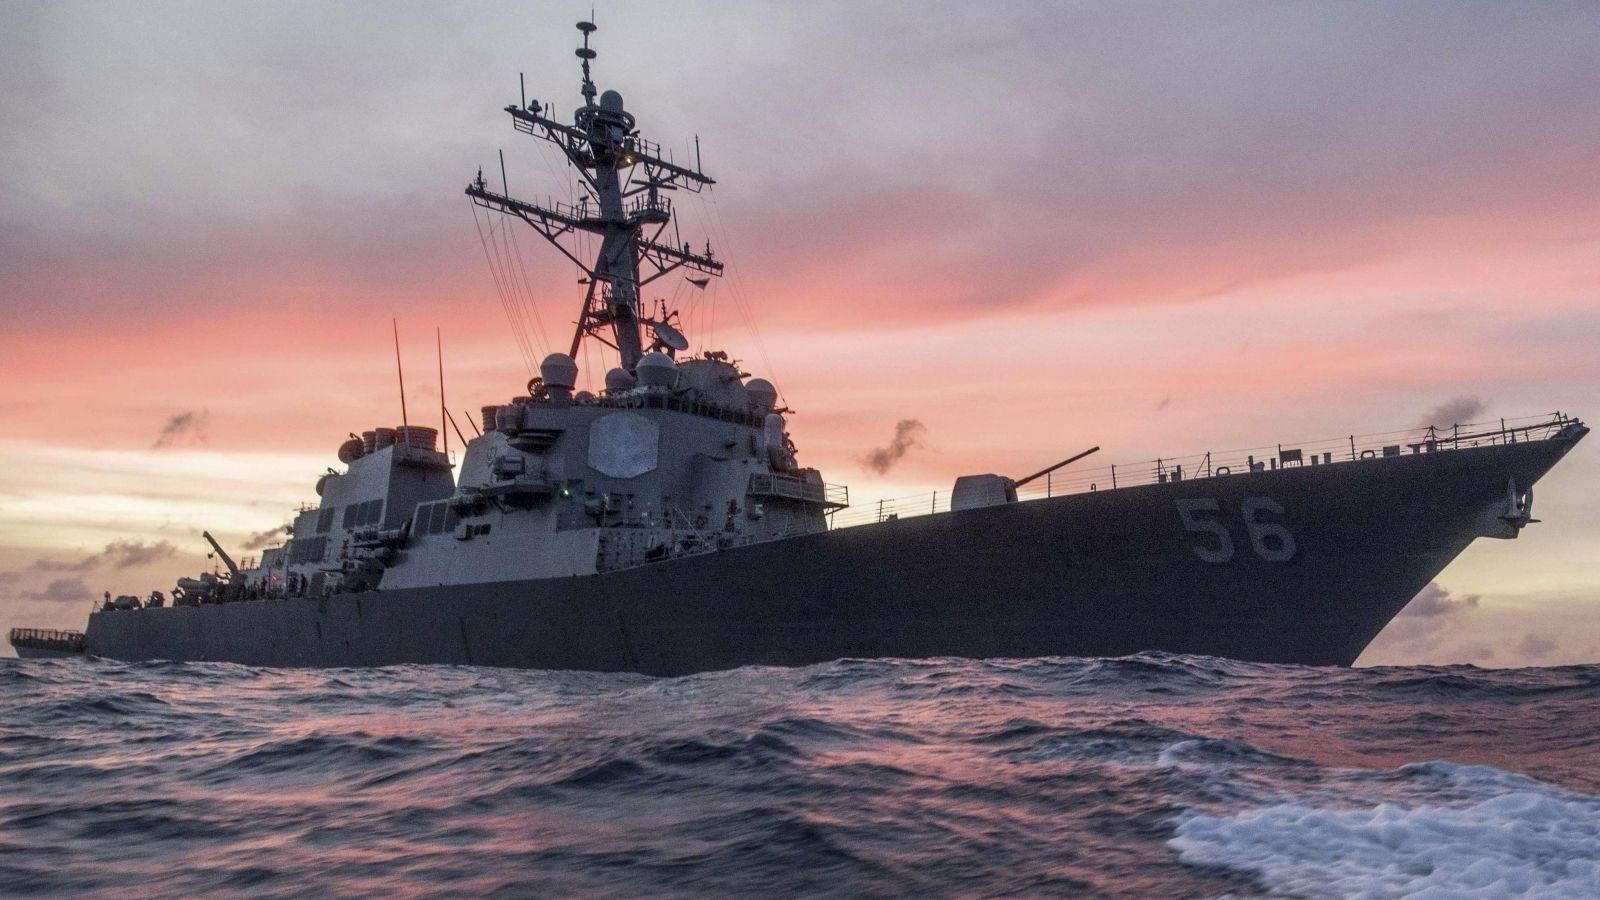 US destroyer USS John McCain collides with oil tanker off